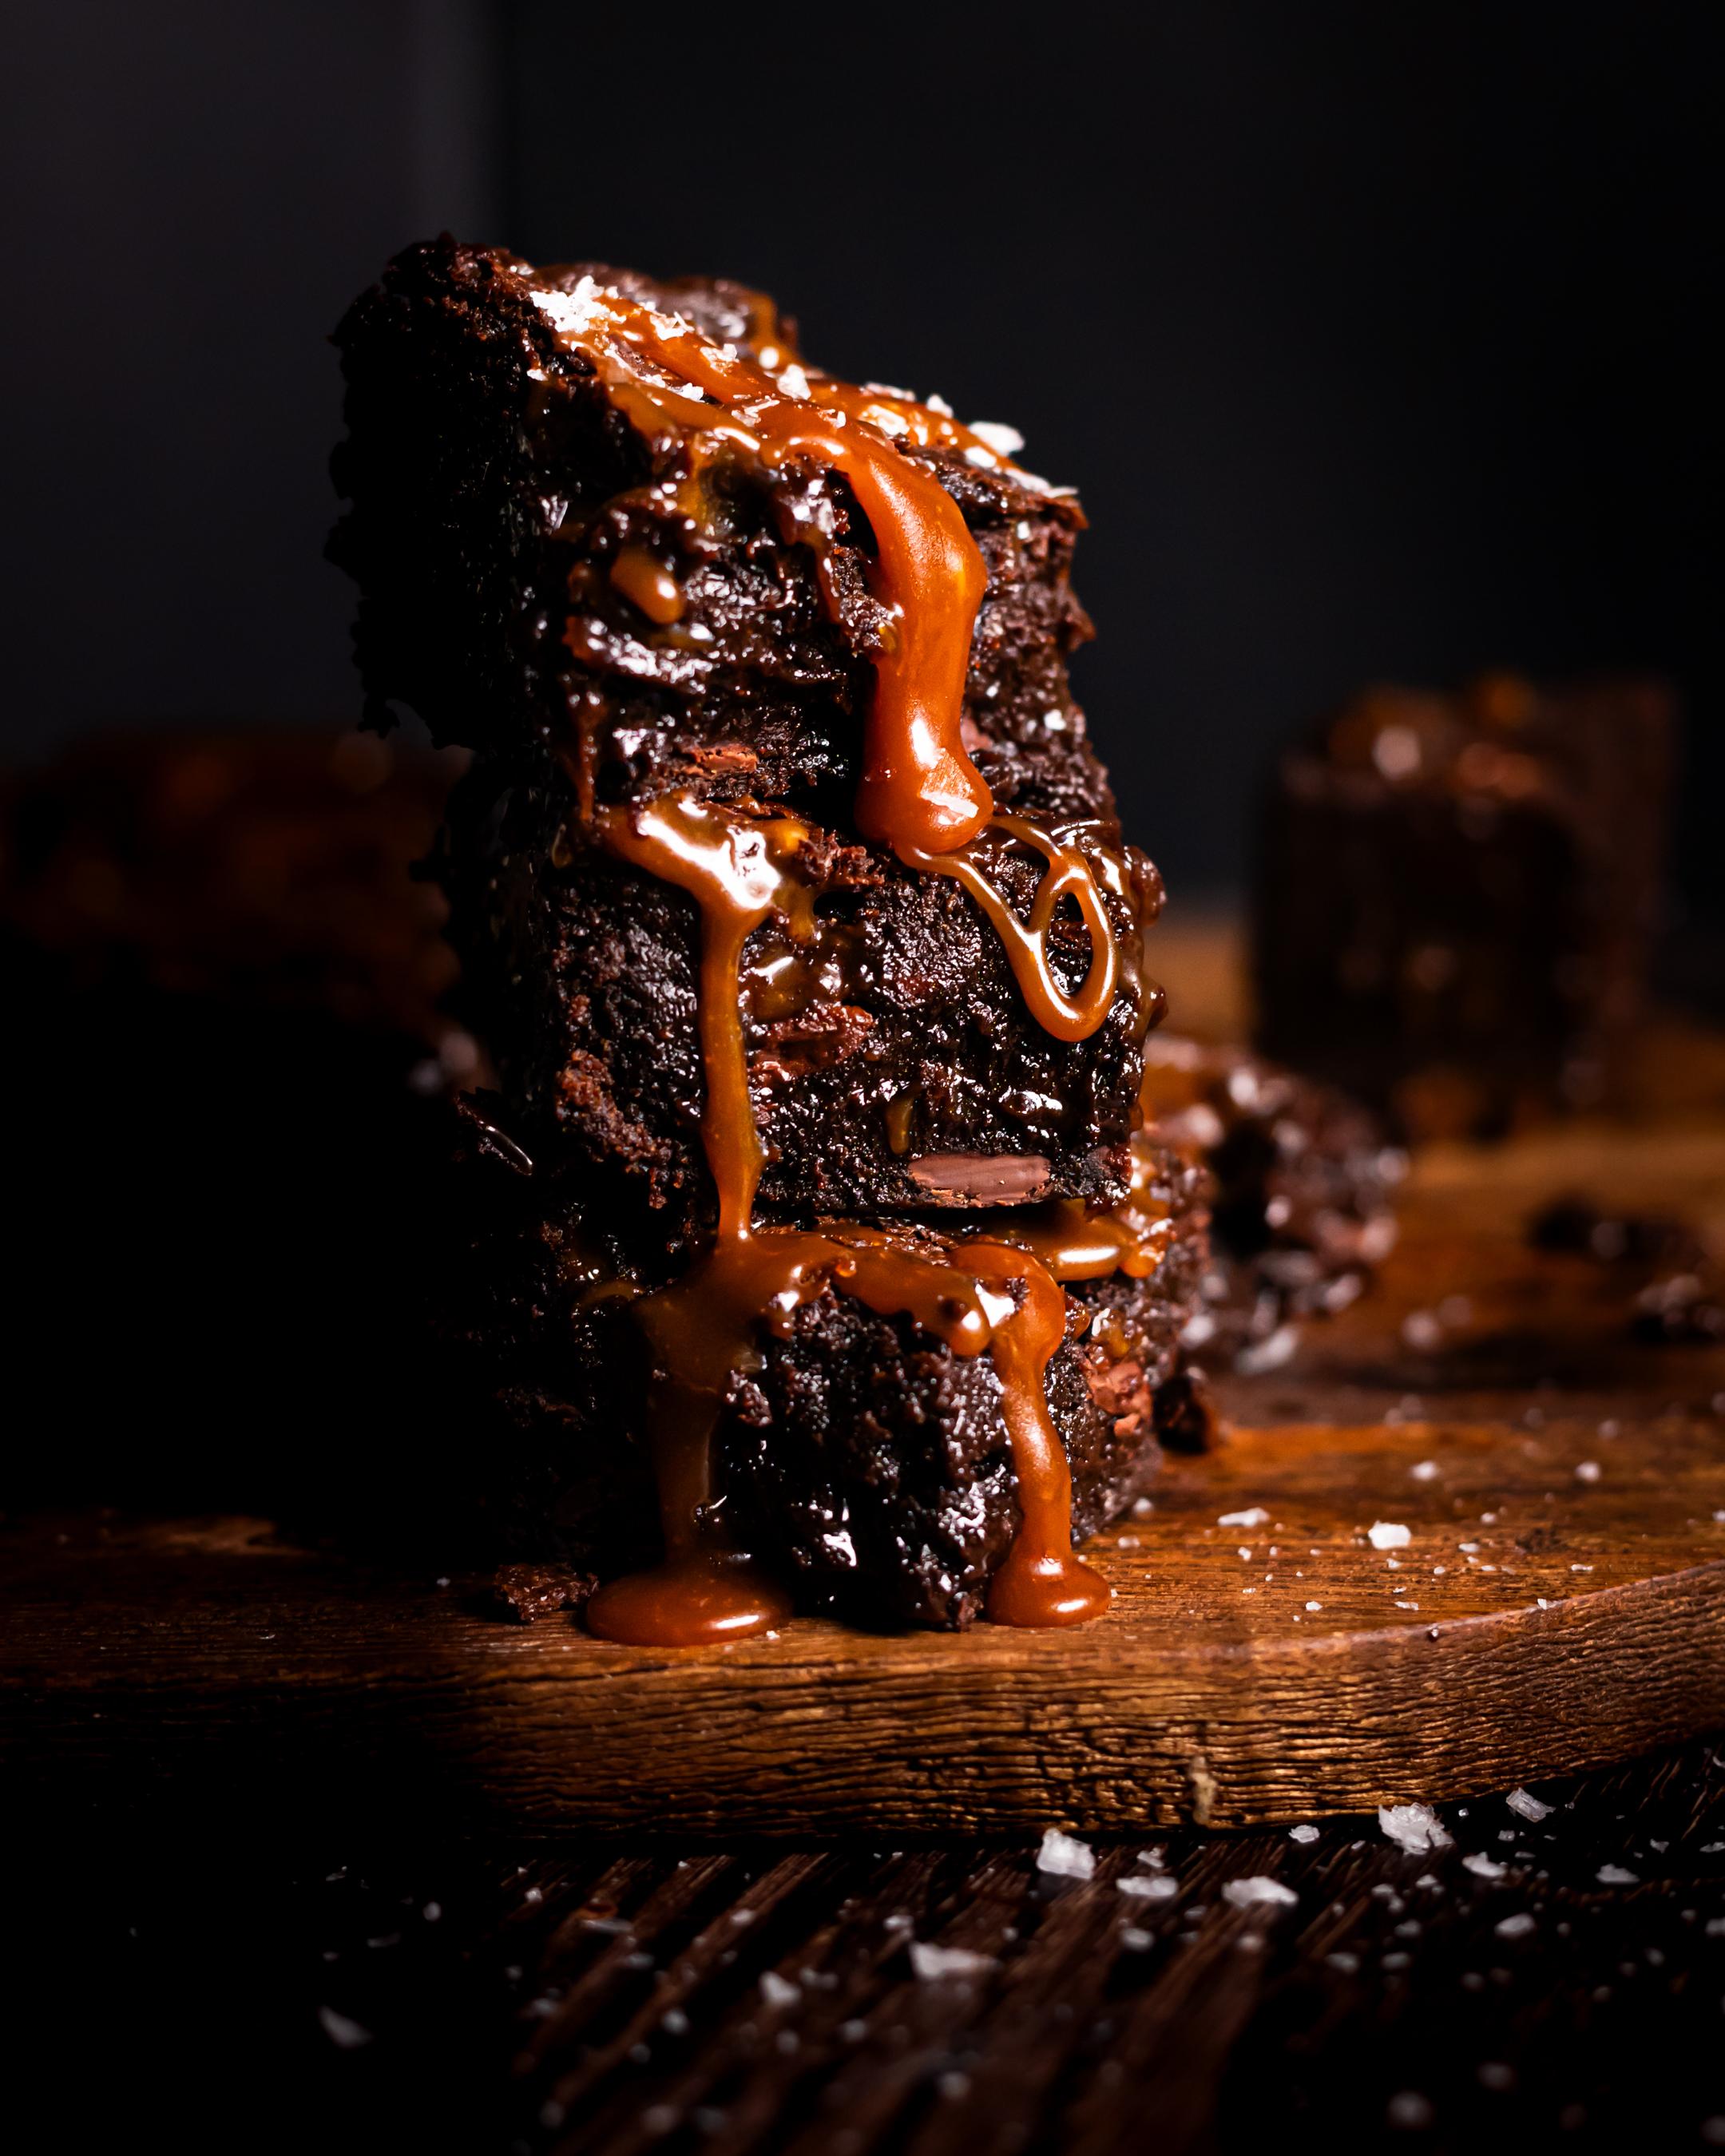 a stack of 3 salted caramel brownies with salted caramel dripping down, sprinkled with sea salt. Salted caramel brownies in the background and sea salt sprinkled in the foreground